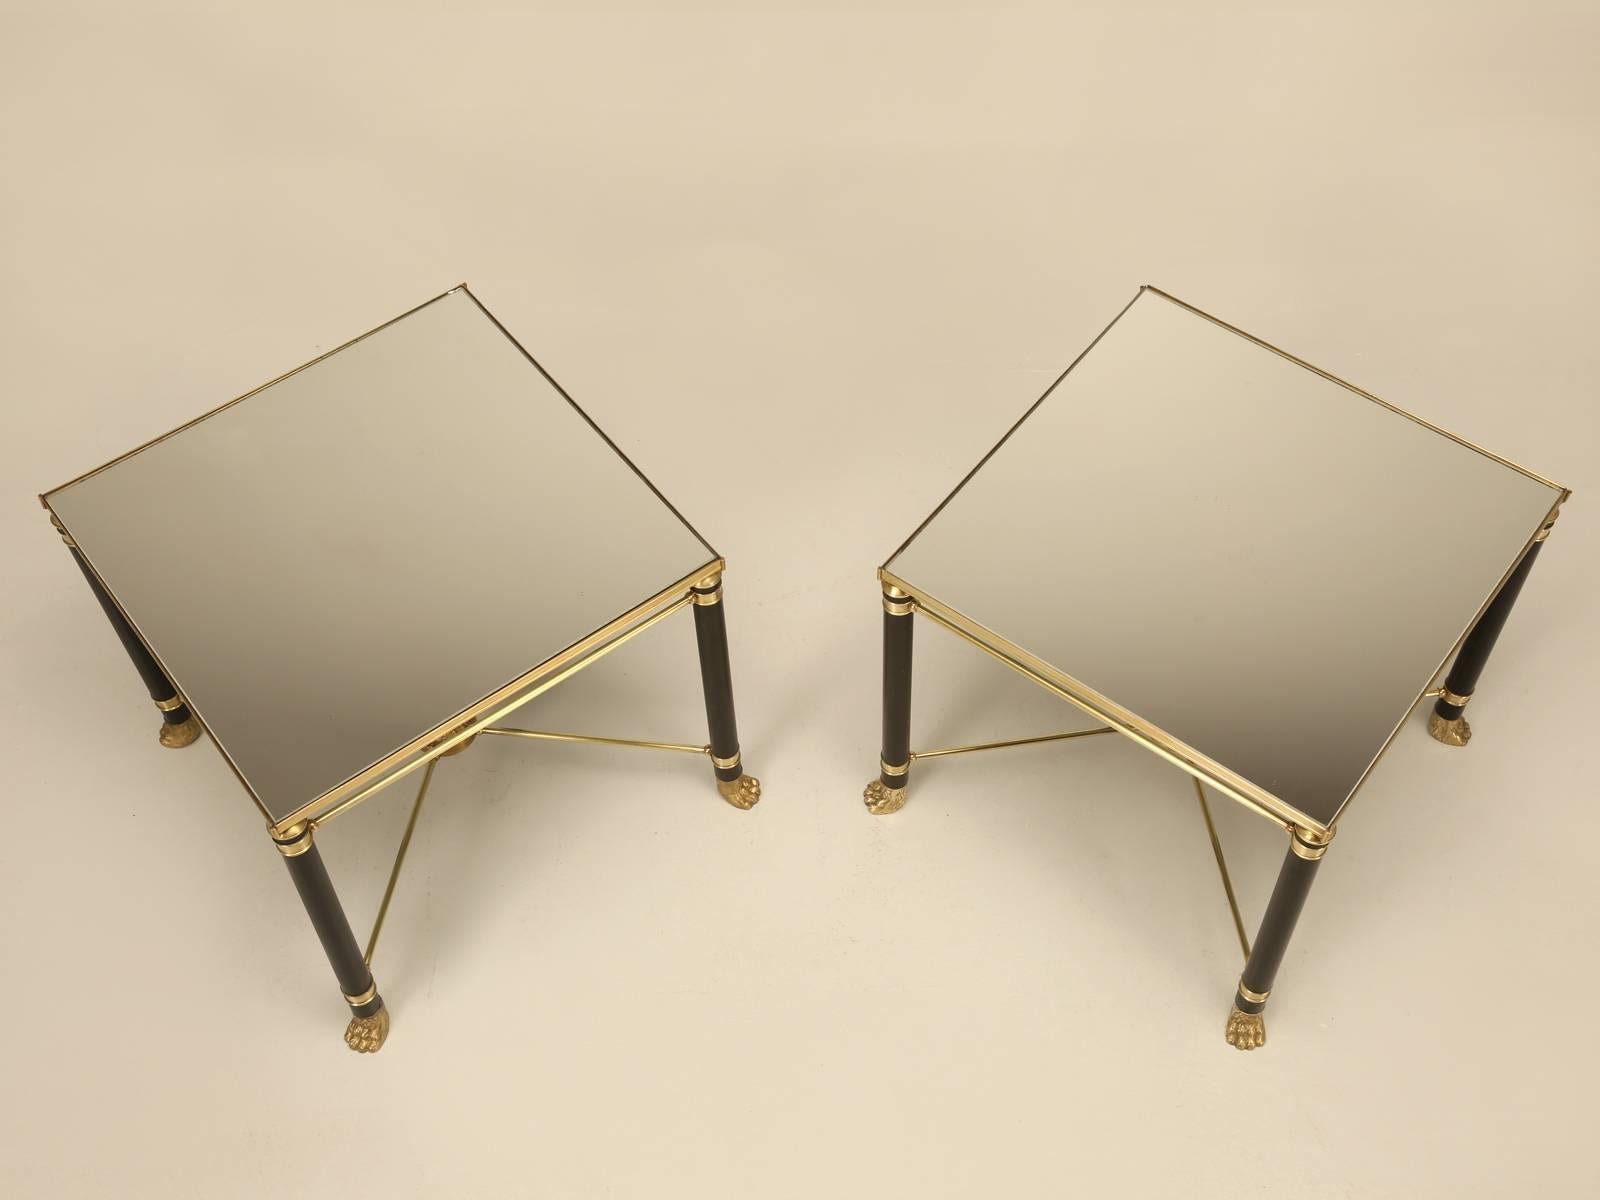 Matched pair of Vintage French Mid-Century Modern, or some dealers in France would call them neoclassical, but either way, they are elegant and it is always difficult to find matched pairs. These can be used as end tables, as I originally think they